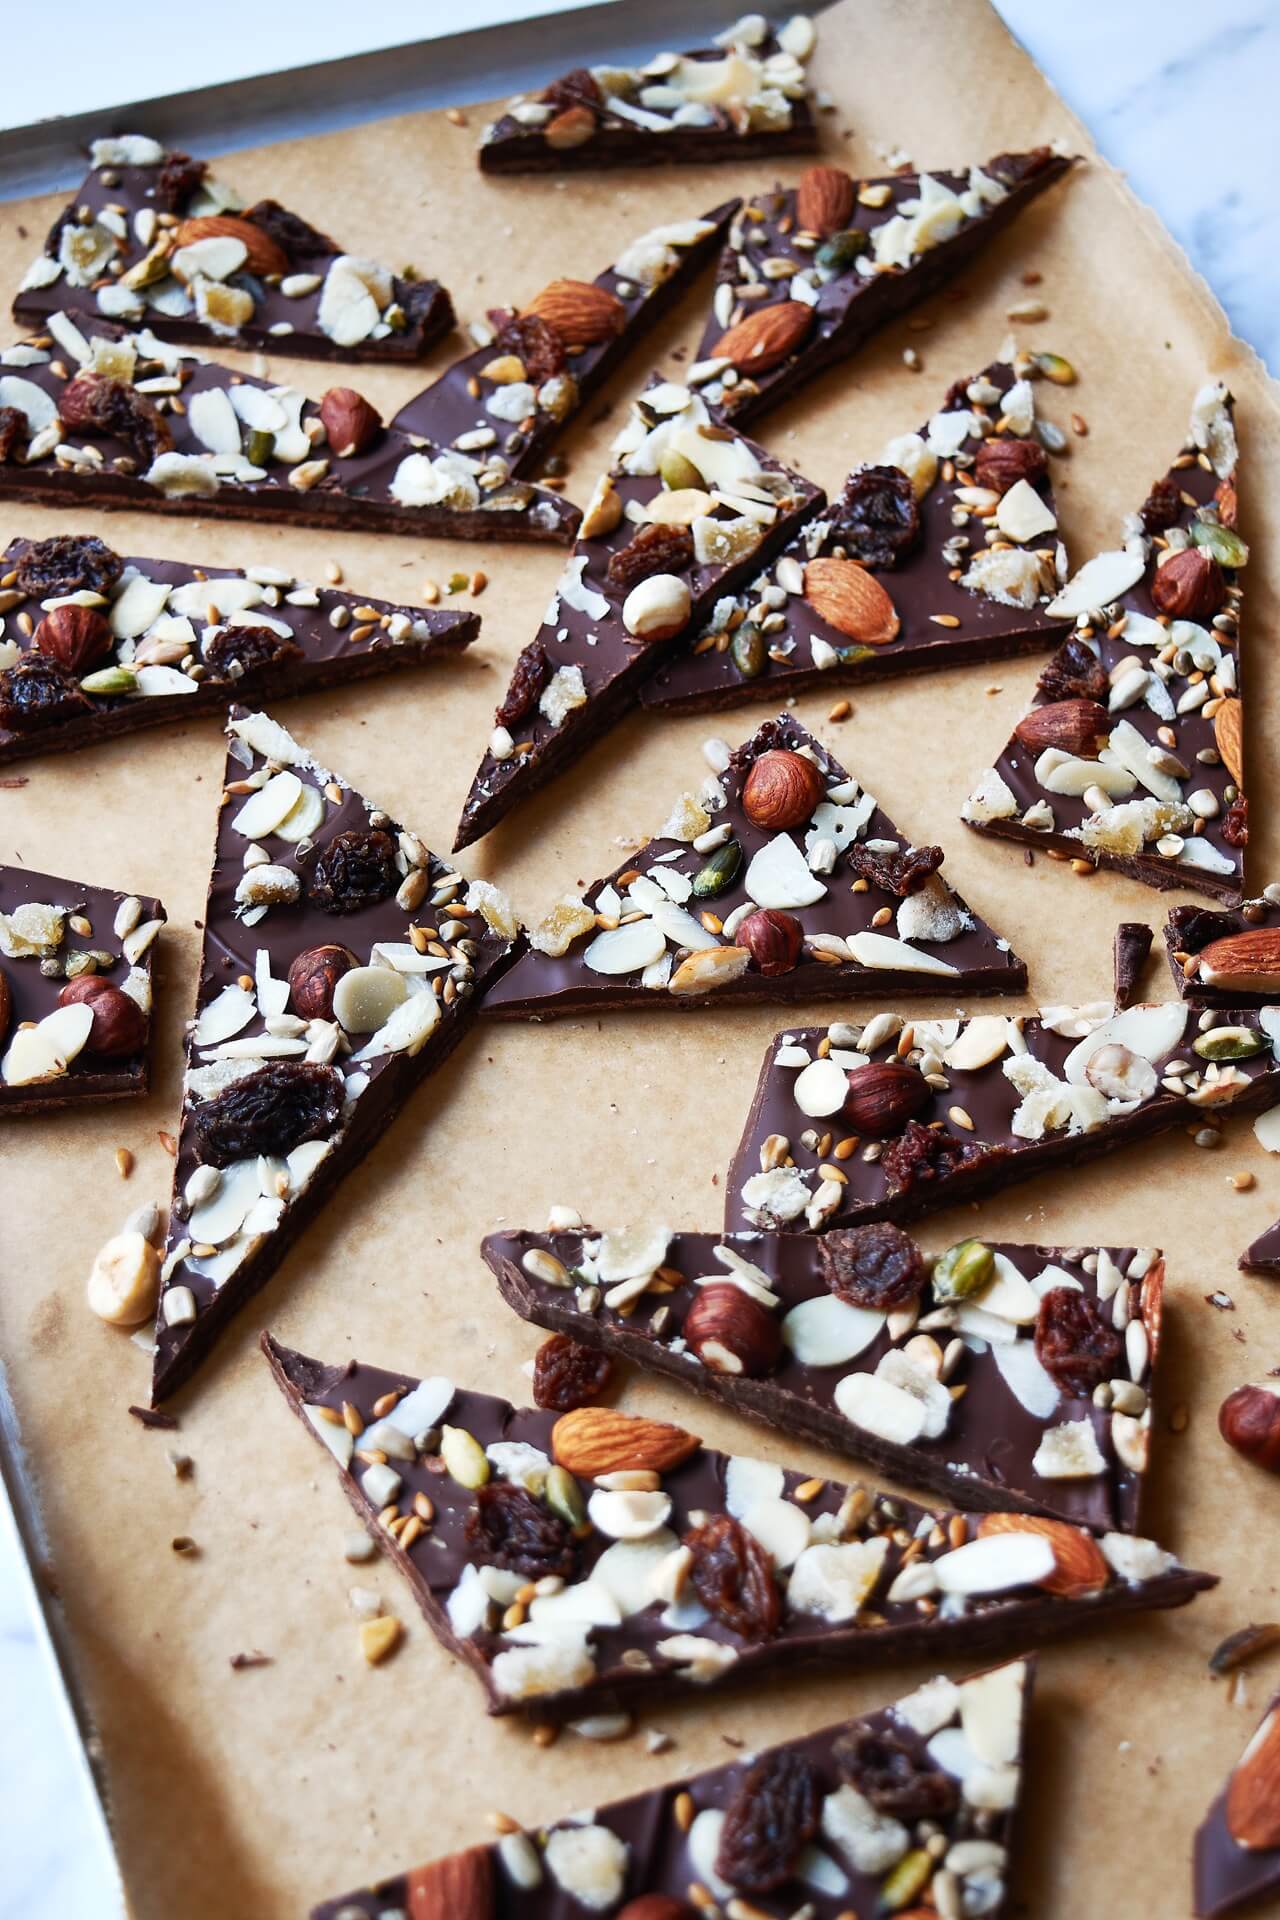 RECIPE FOR CHOCOLATE FRUIT AND NUT BARK